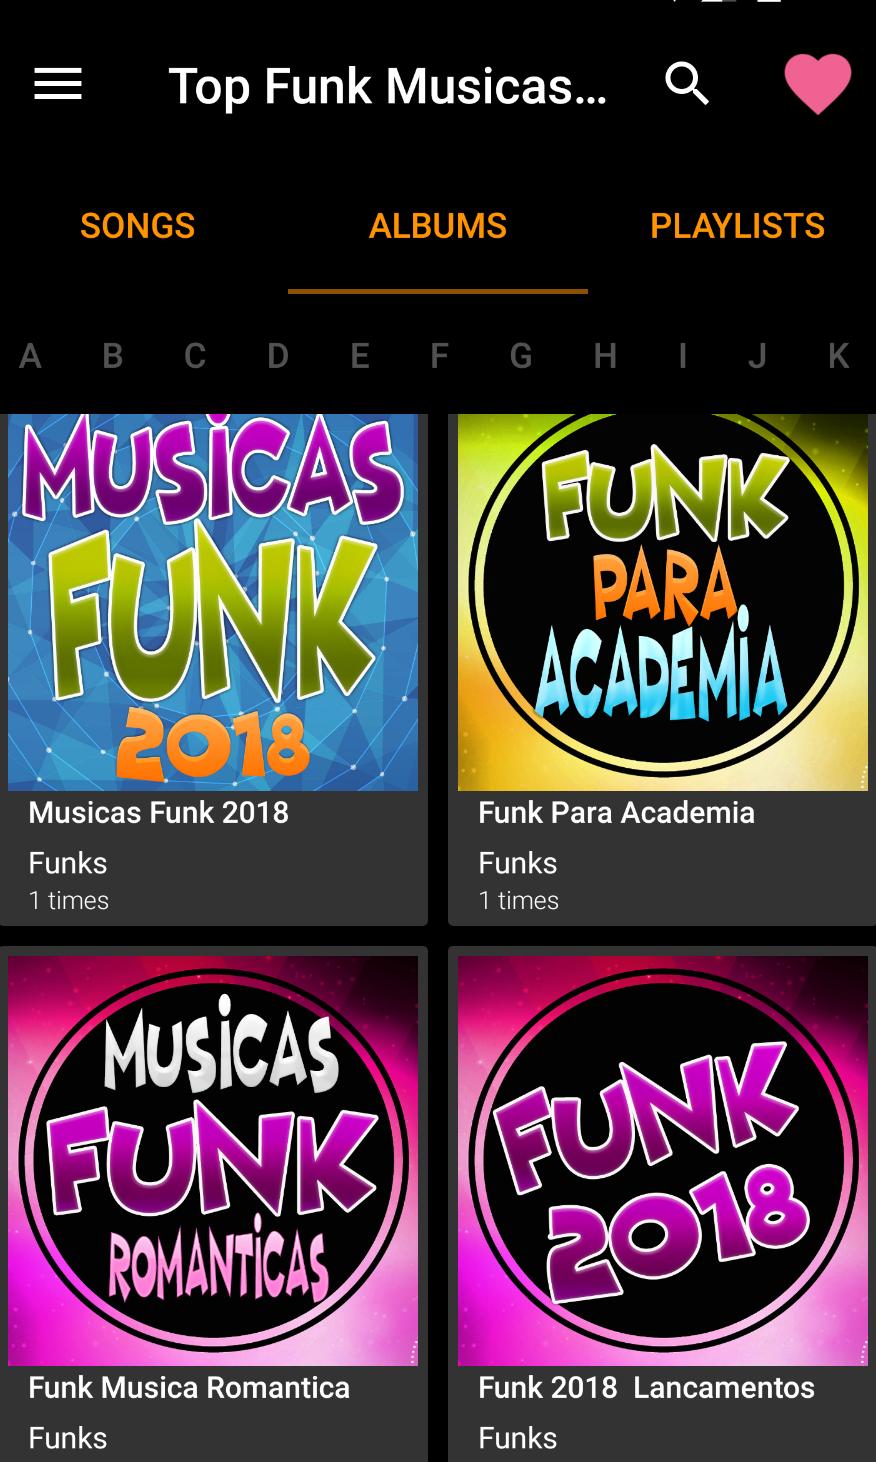 Top Funk Musicas Romanticas for Android - APK Download